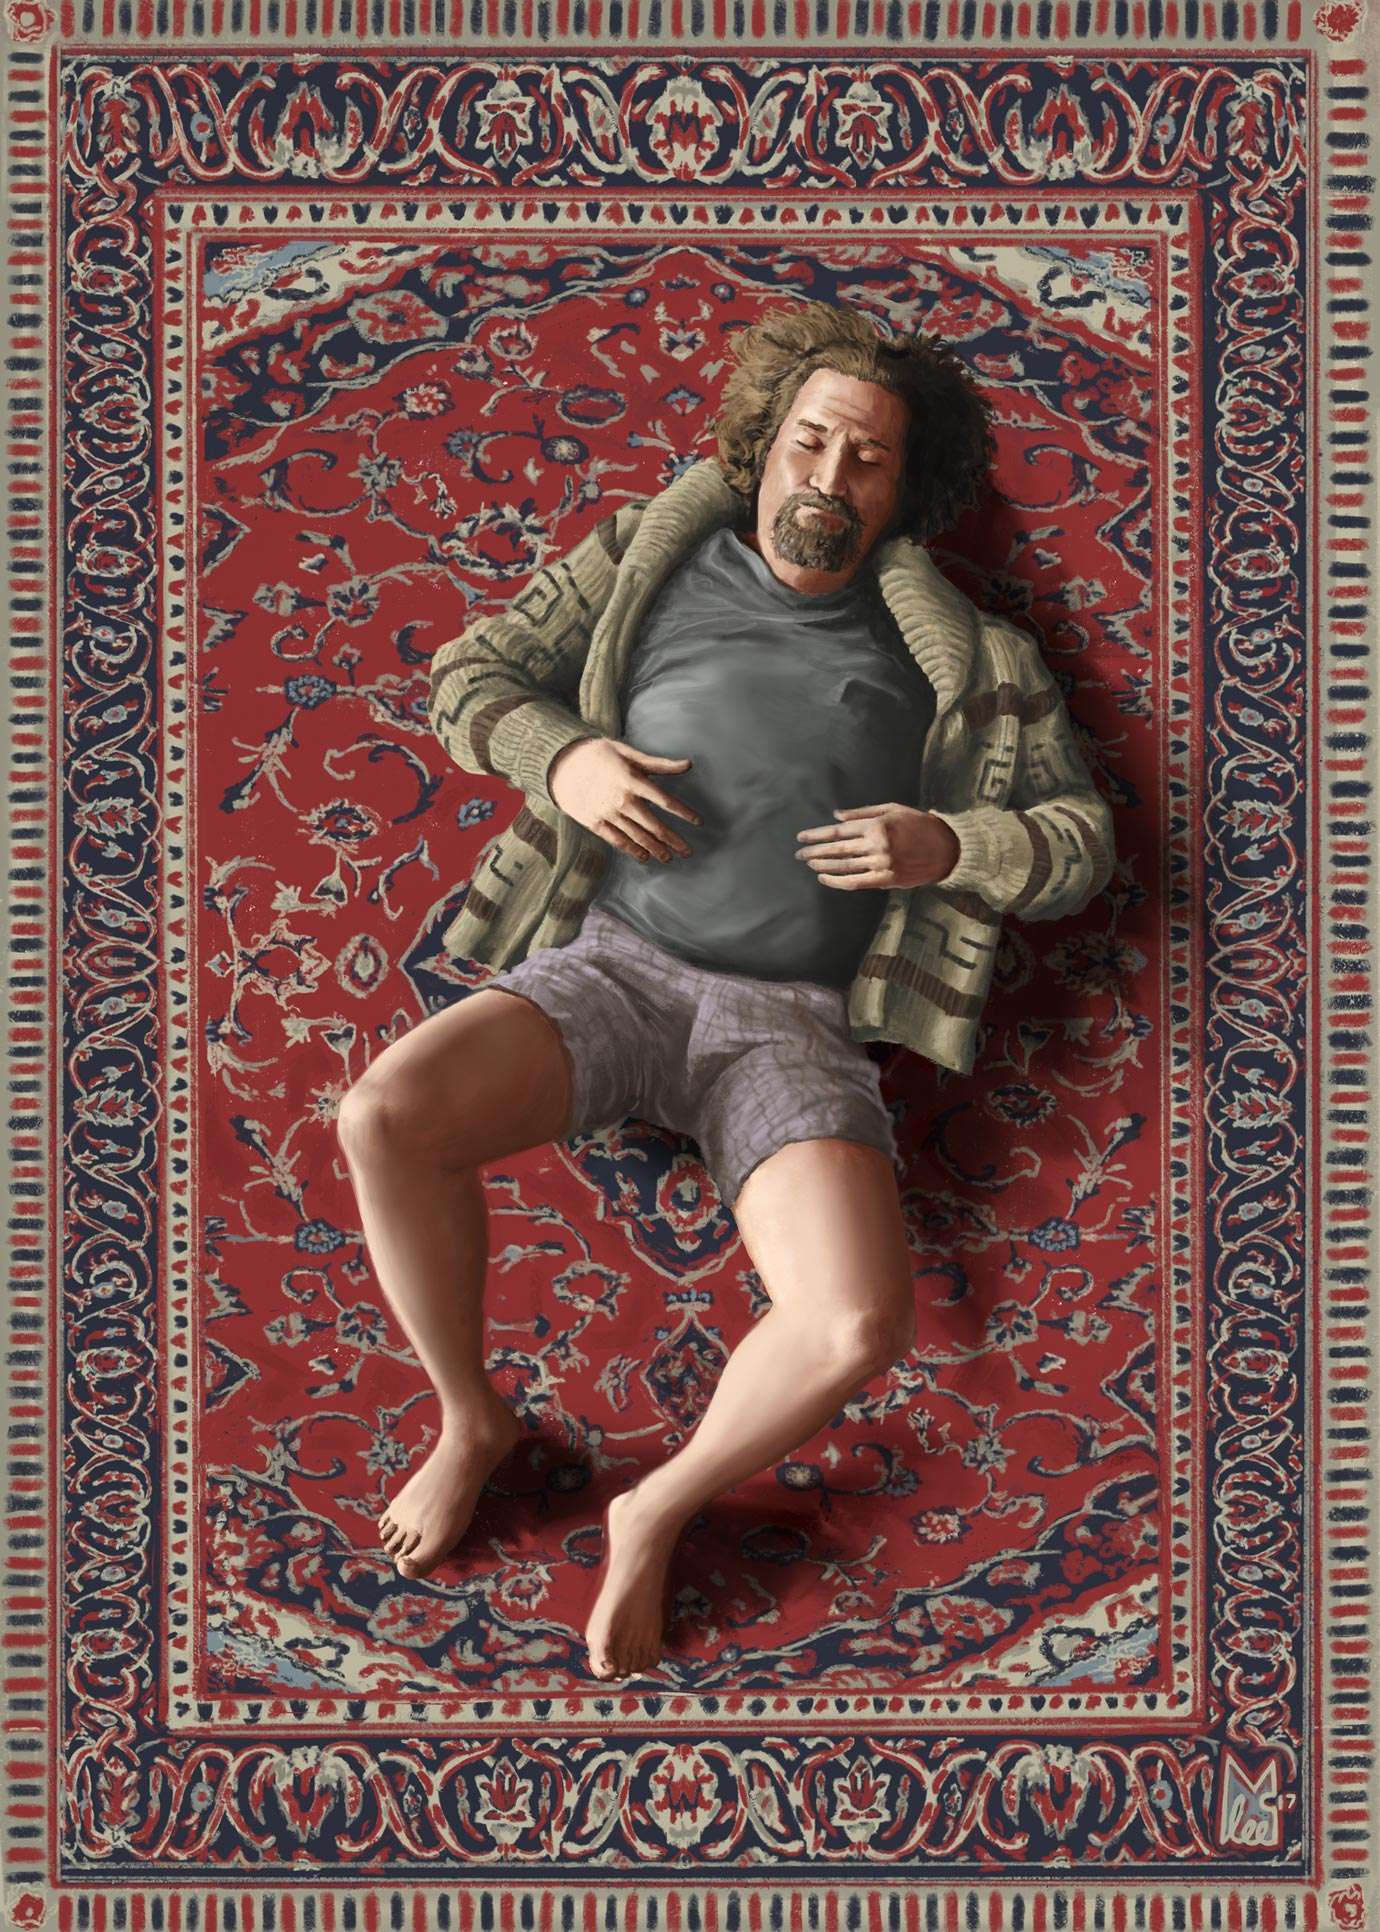 image showing I painted The Dude from The Big Lebowski, spent far too long on the rug detail!